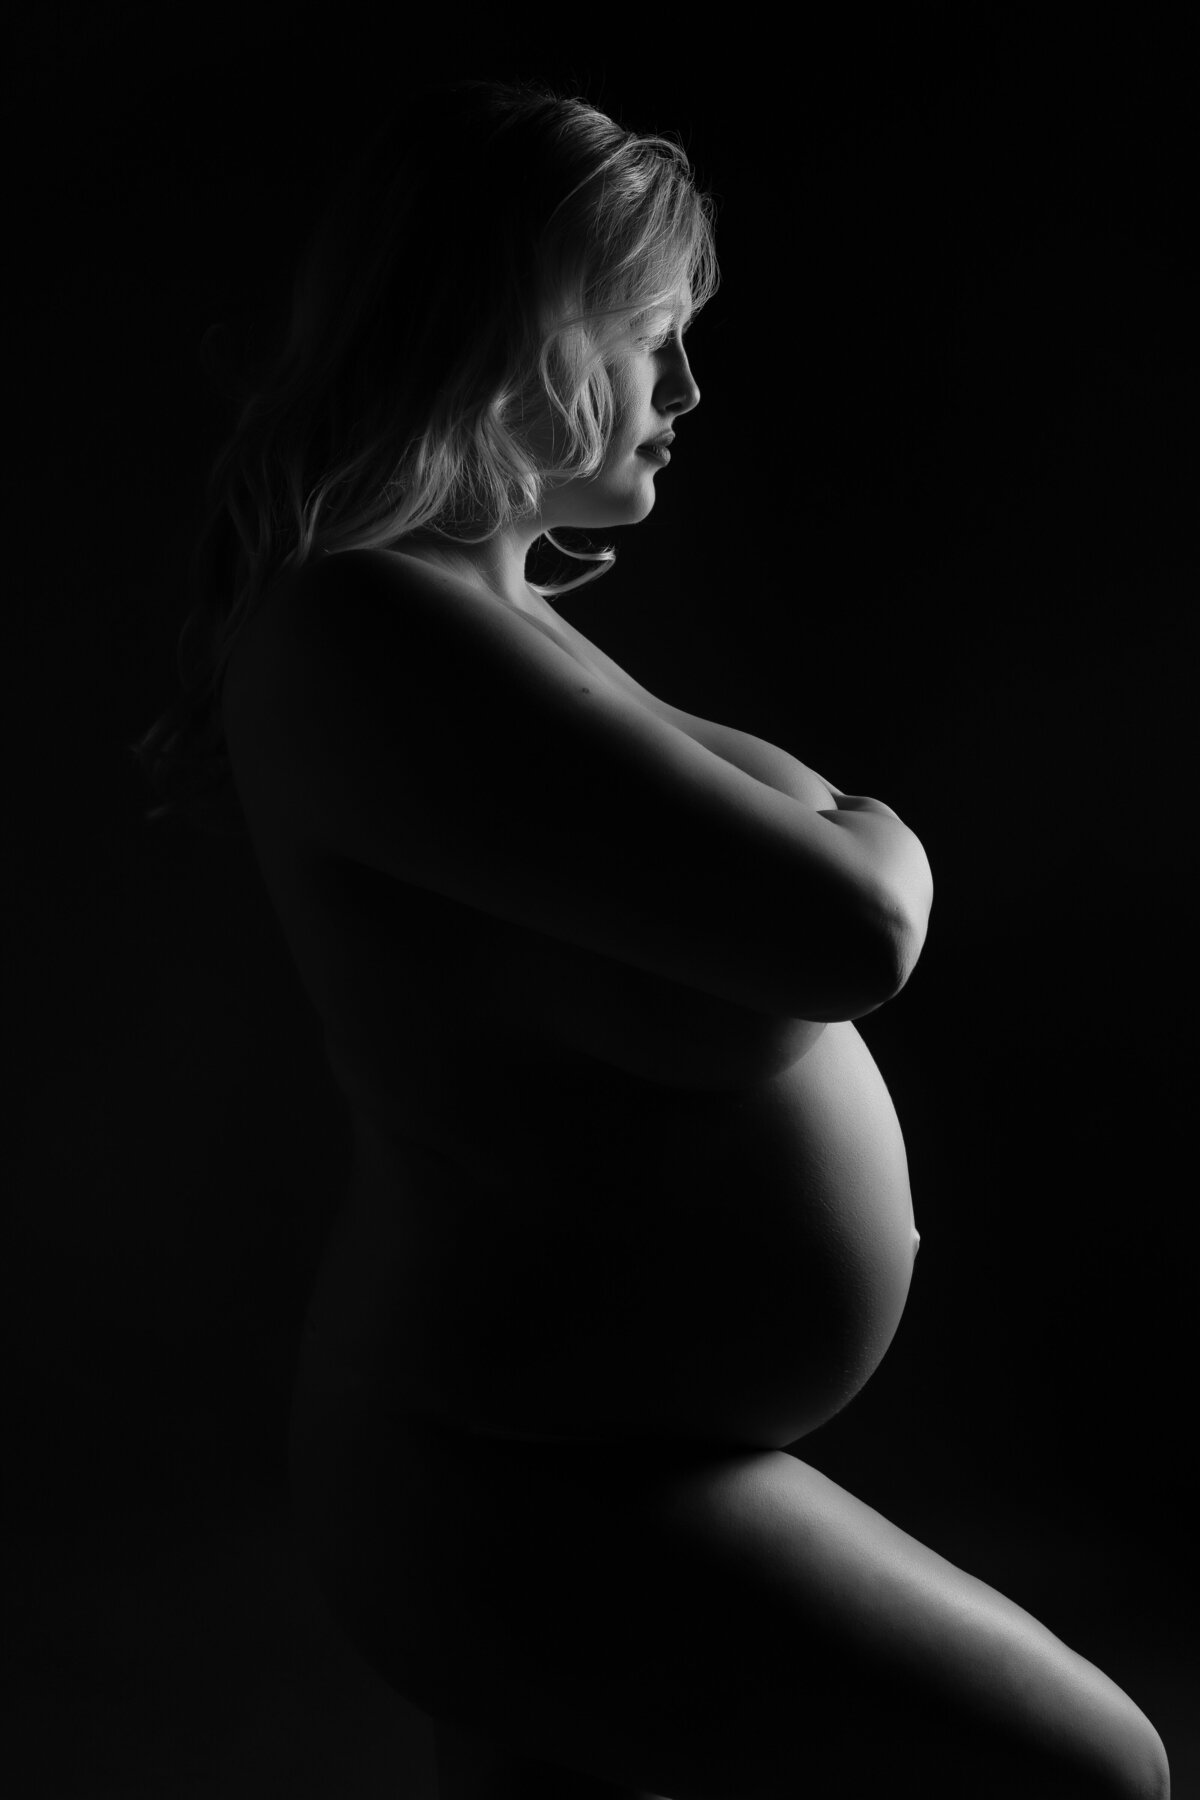 low key maternity lighting showing silhouette of a pregnant womans shape